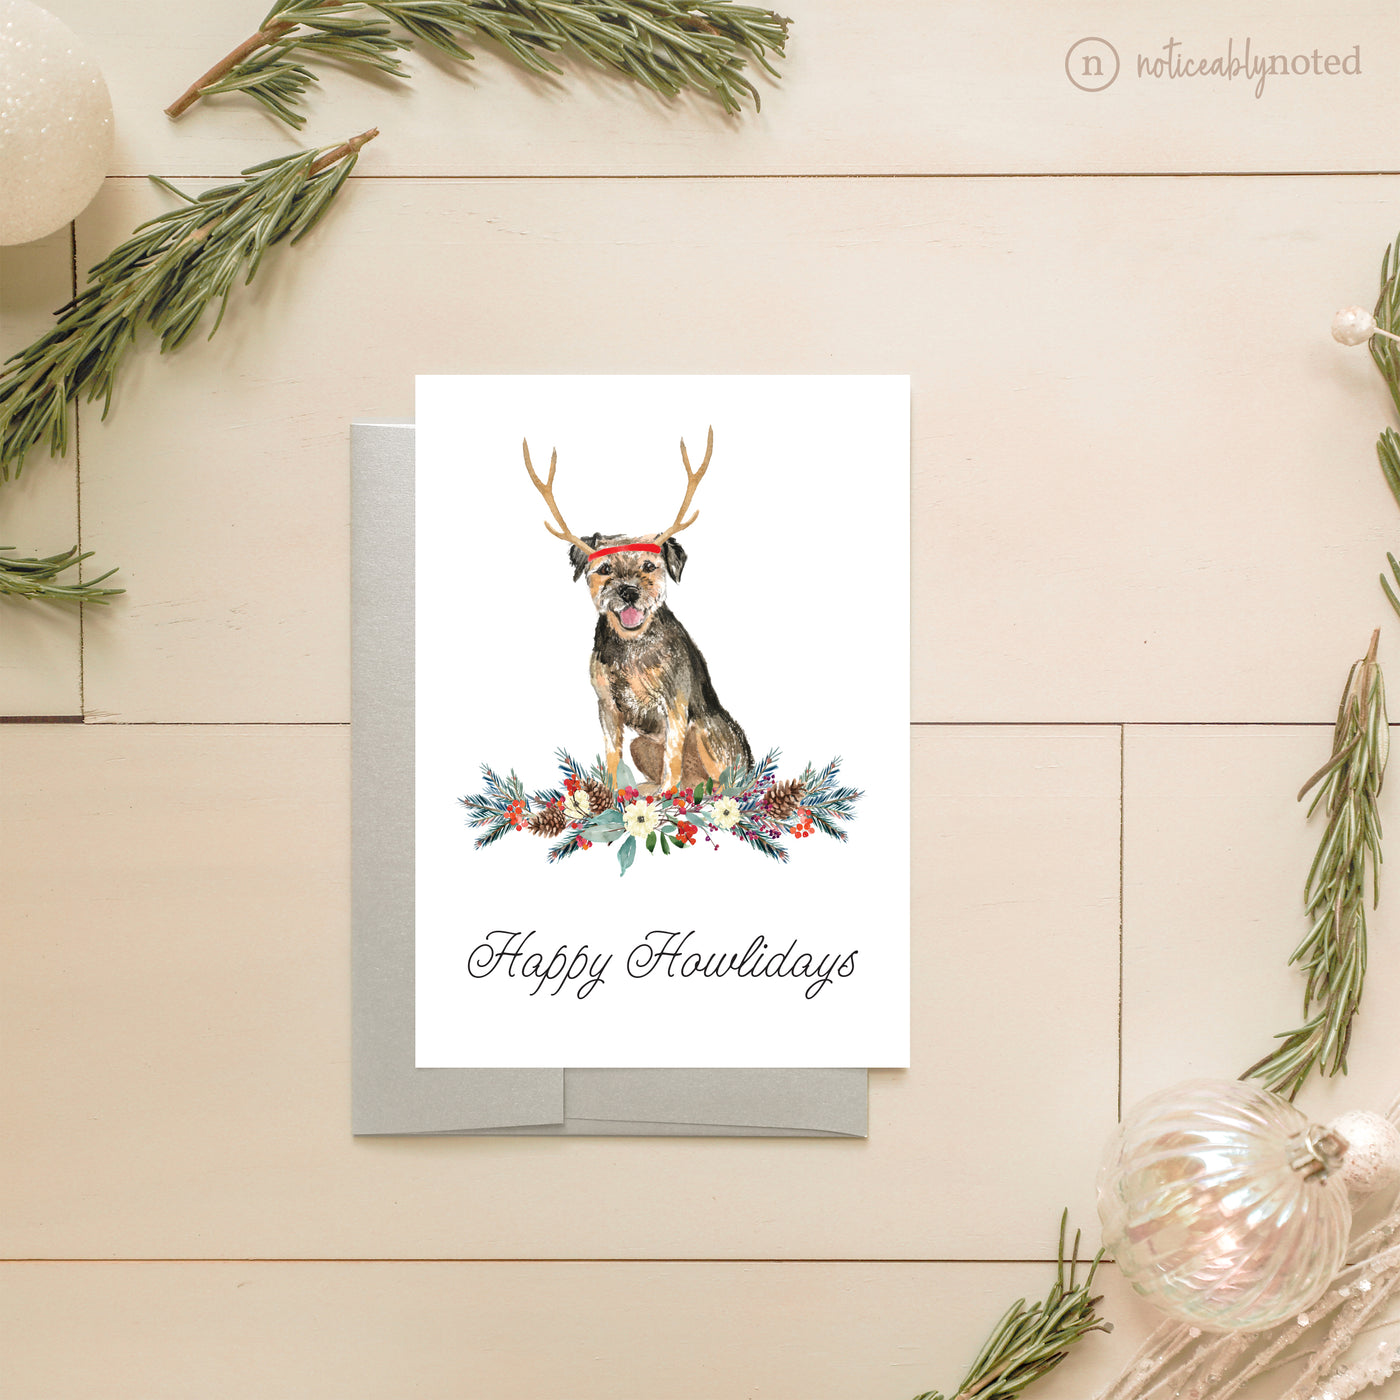 Border Terrier Dog Holiday Card | Noticeably Noted